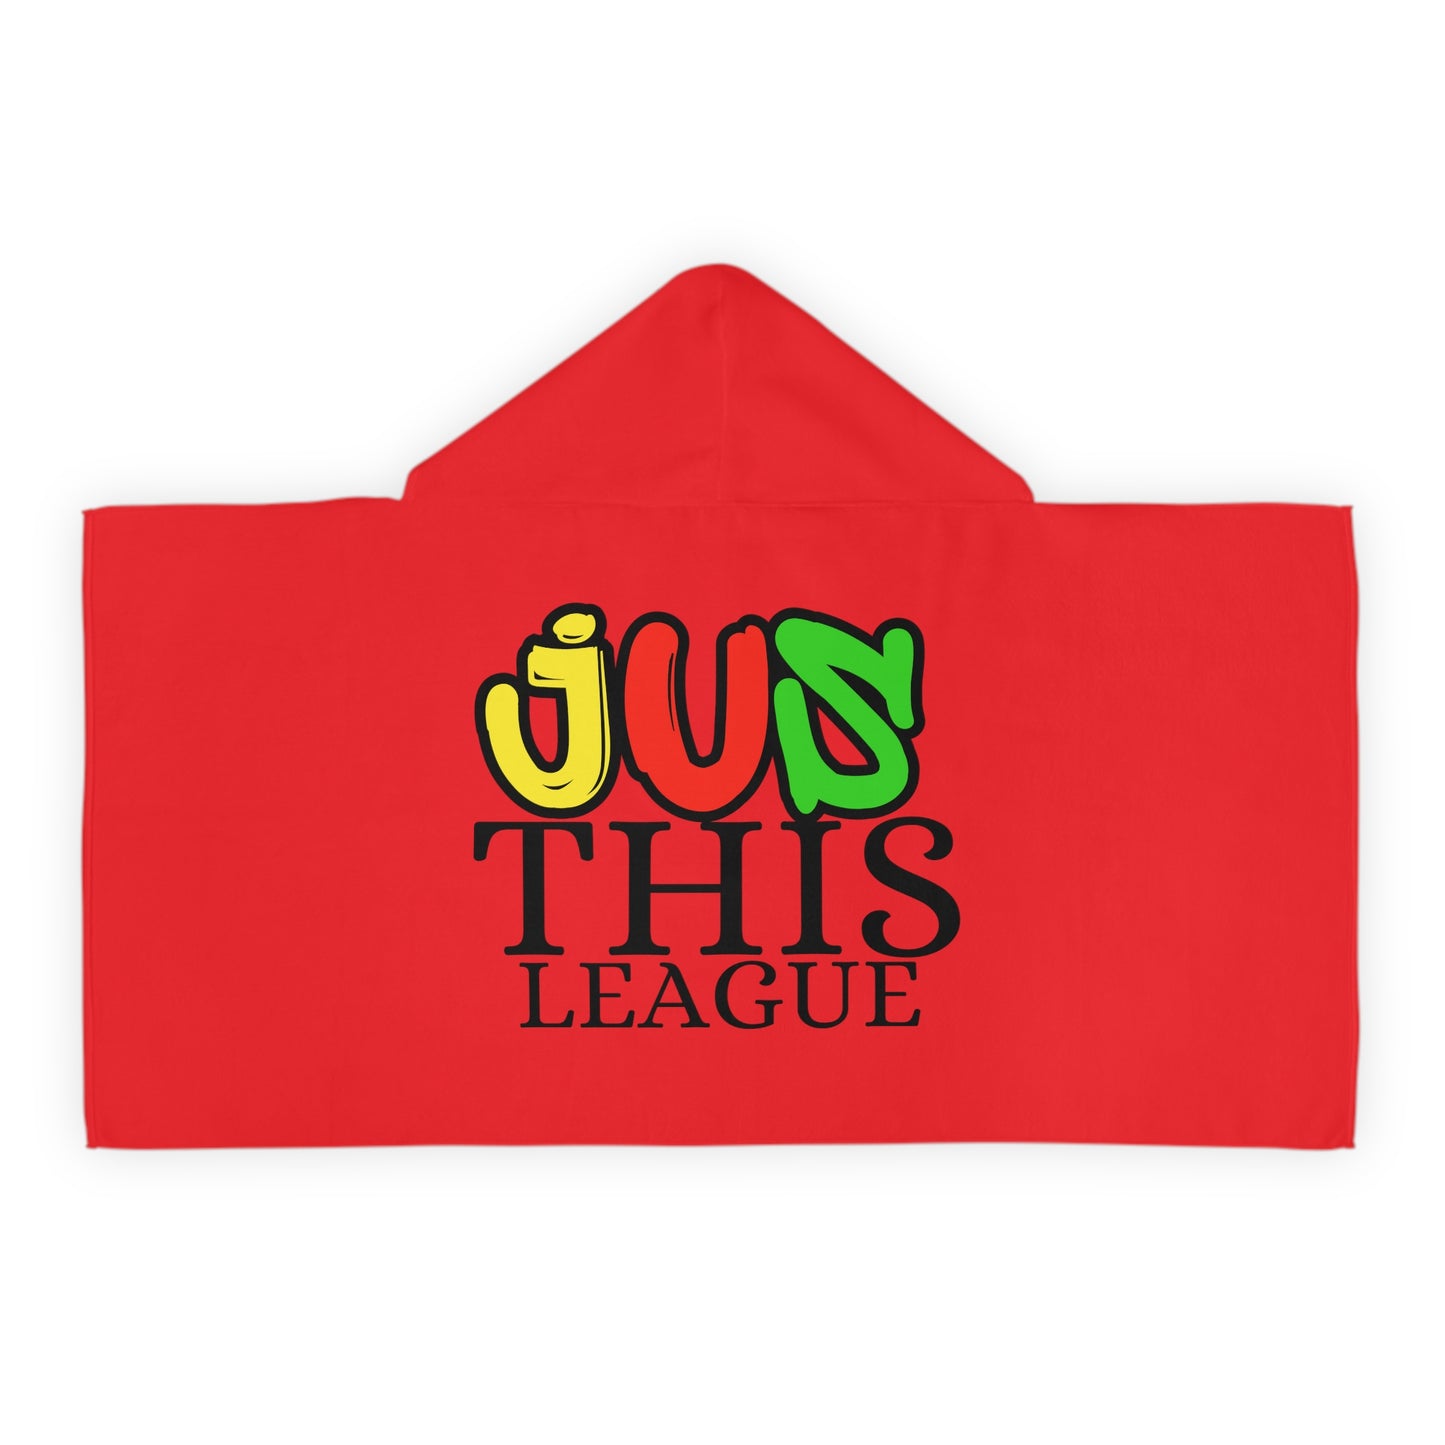 JUSKind Youth Hooded Towel